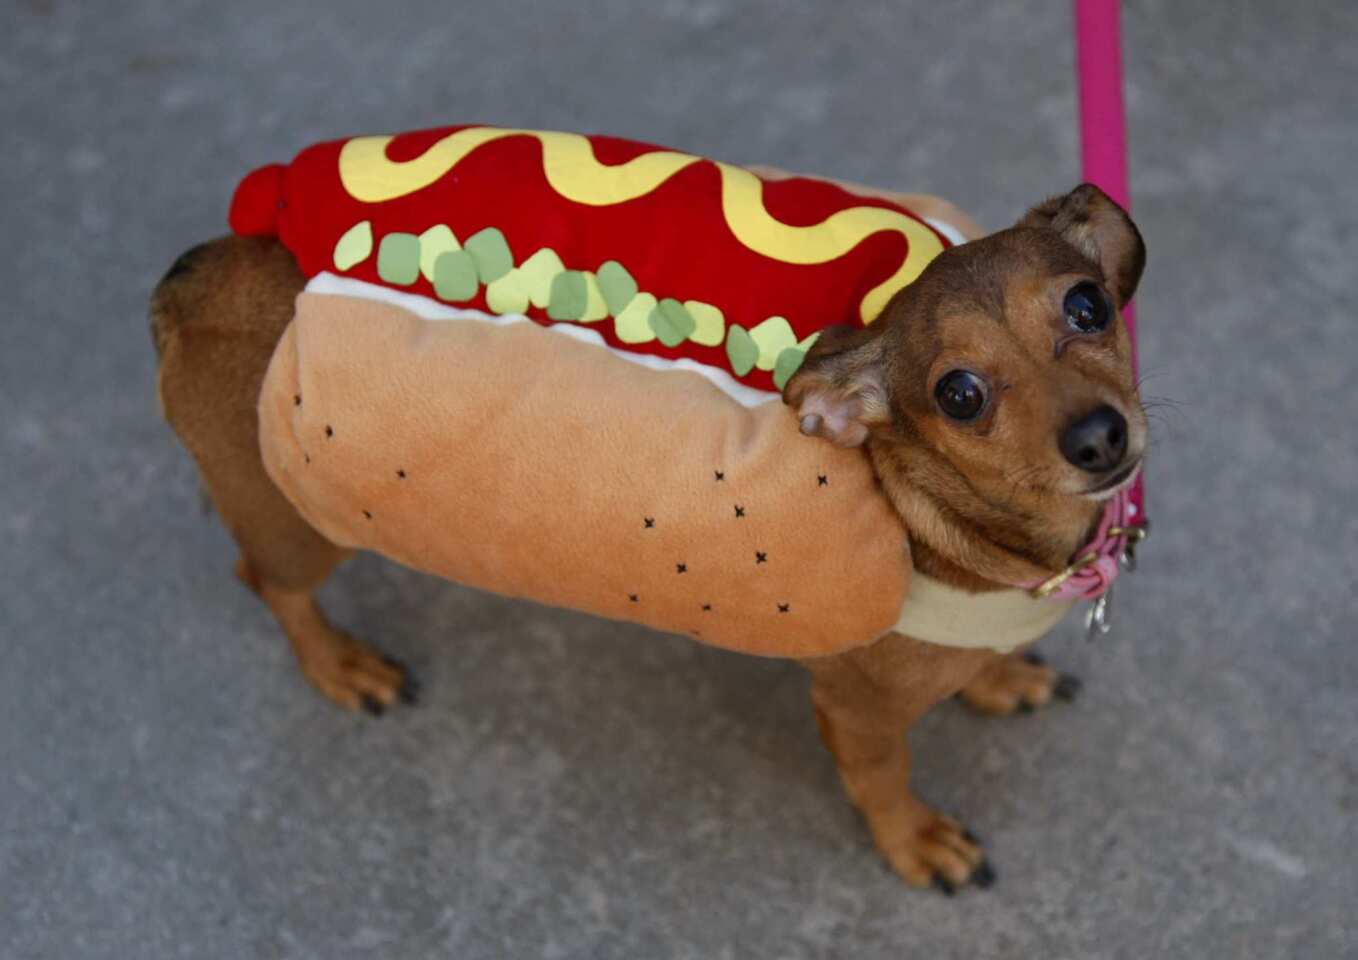 Another hot dogger